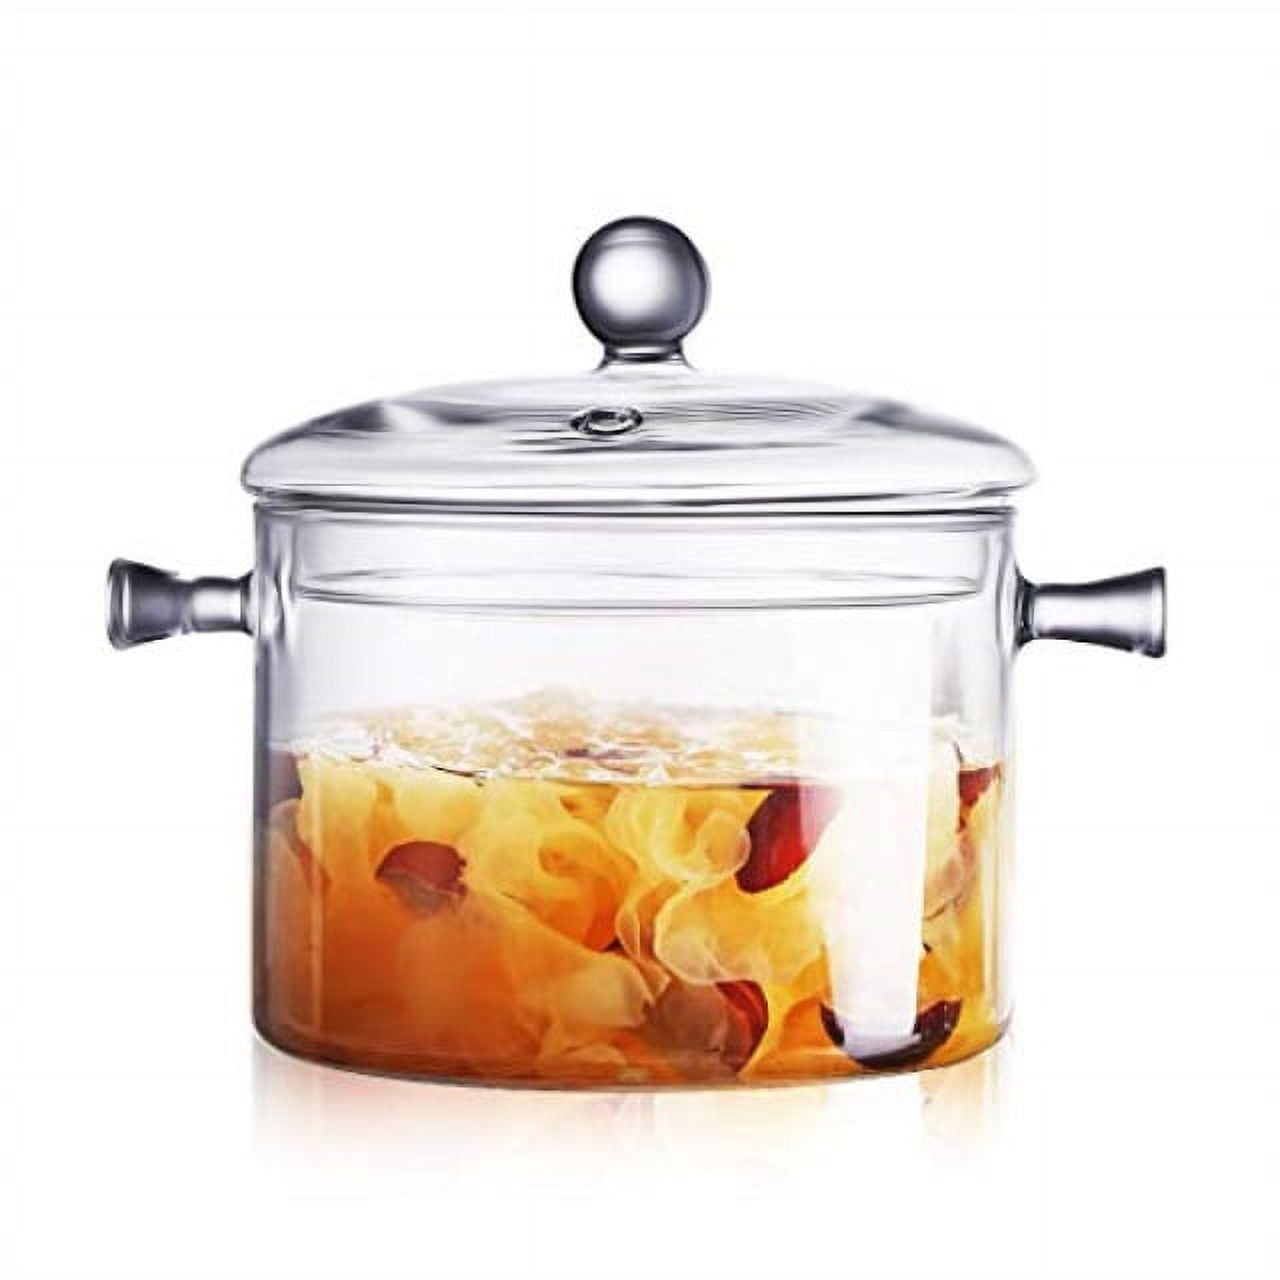 UPKOCH Clear Glass Cooking Pot Heat Resistant Stovetop Pot 50Oz Cooking  Saucepan Multi-Function Stew Pot for Home Kitchen Restaurant